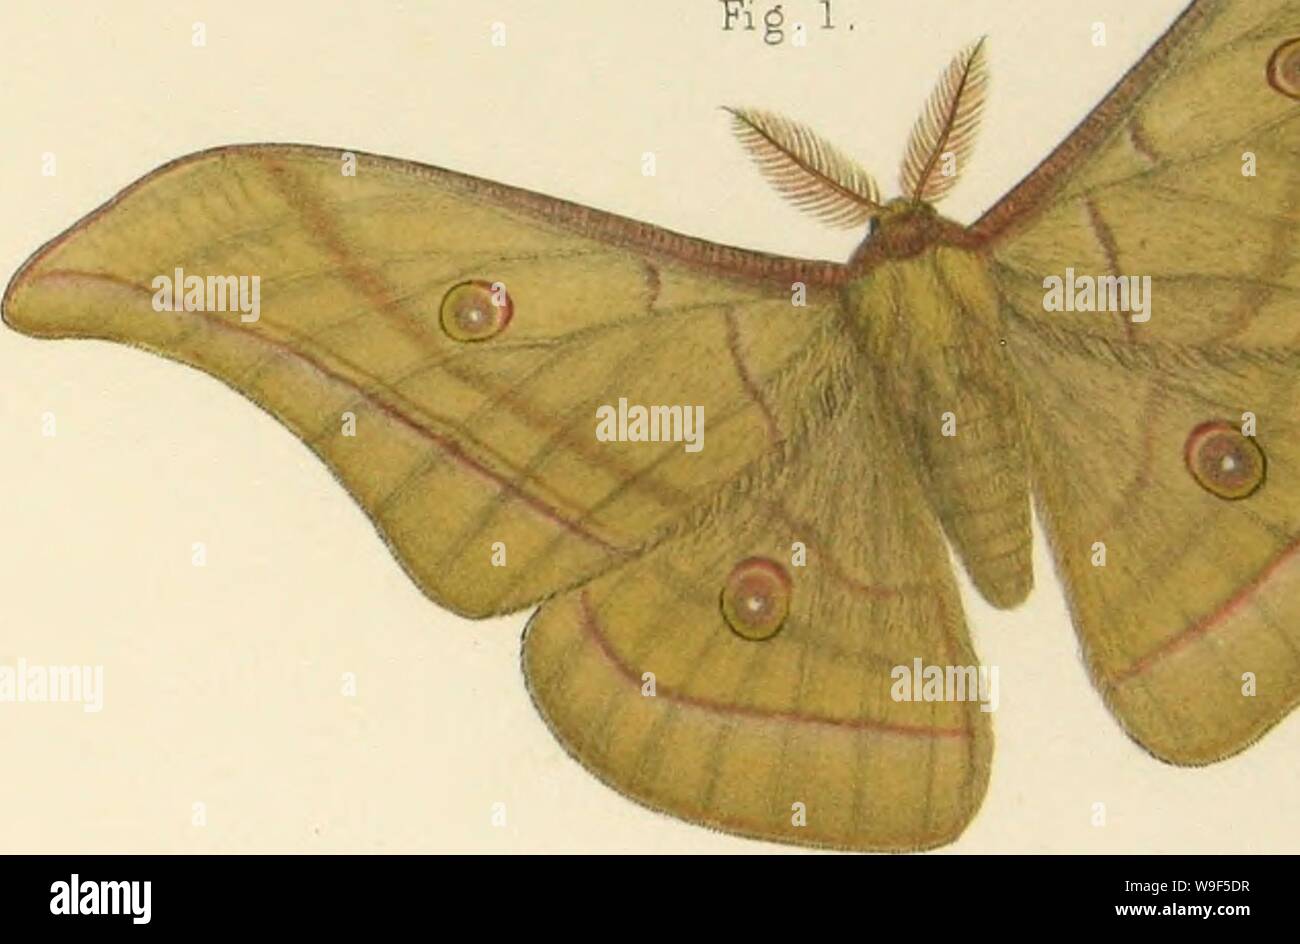 Archive image from page 16 of The silkworm moths of India;. The silkworm moths of India; or, Indian Saturnidae, a family of Bombycia moths, with antennae of males distichously pectinate and body wooly. Six plates, containing 25 figures, coloured after nature hitherto unpublished, but prepared for a contemplated work on the silkworm moths of India  CUbiodiversity1128599 Year: n.d.] ( Fitf.l Stock Photo